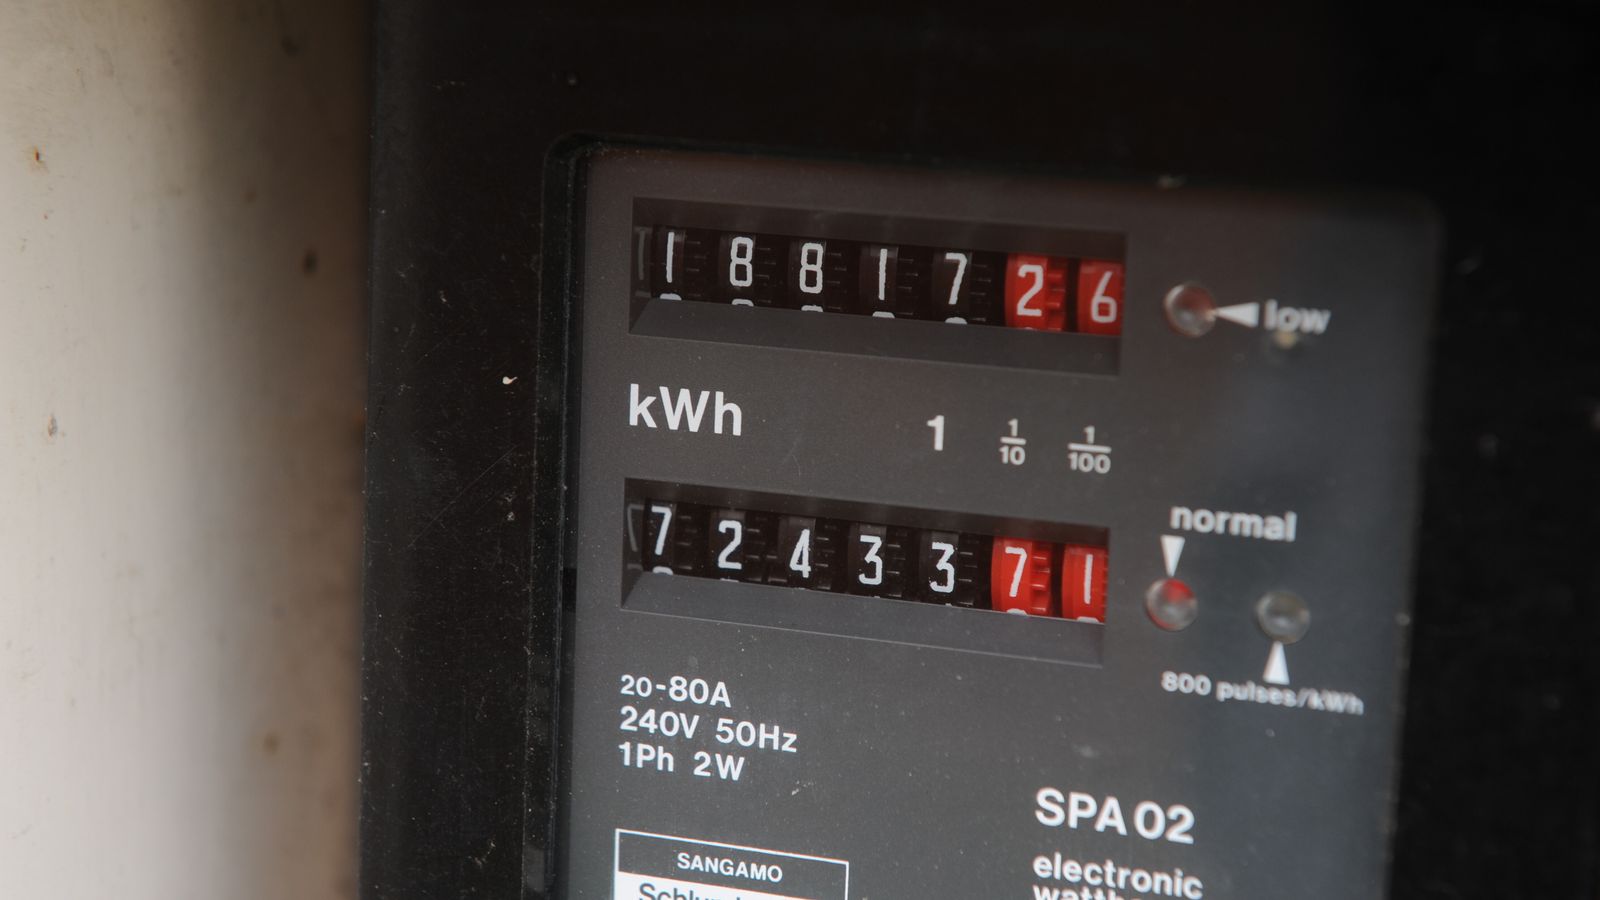 Ofgem tells suppliers to suspend the forced installation of prepayment meters, Sky News understands